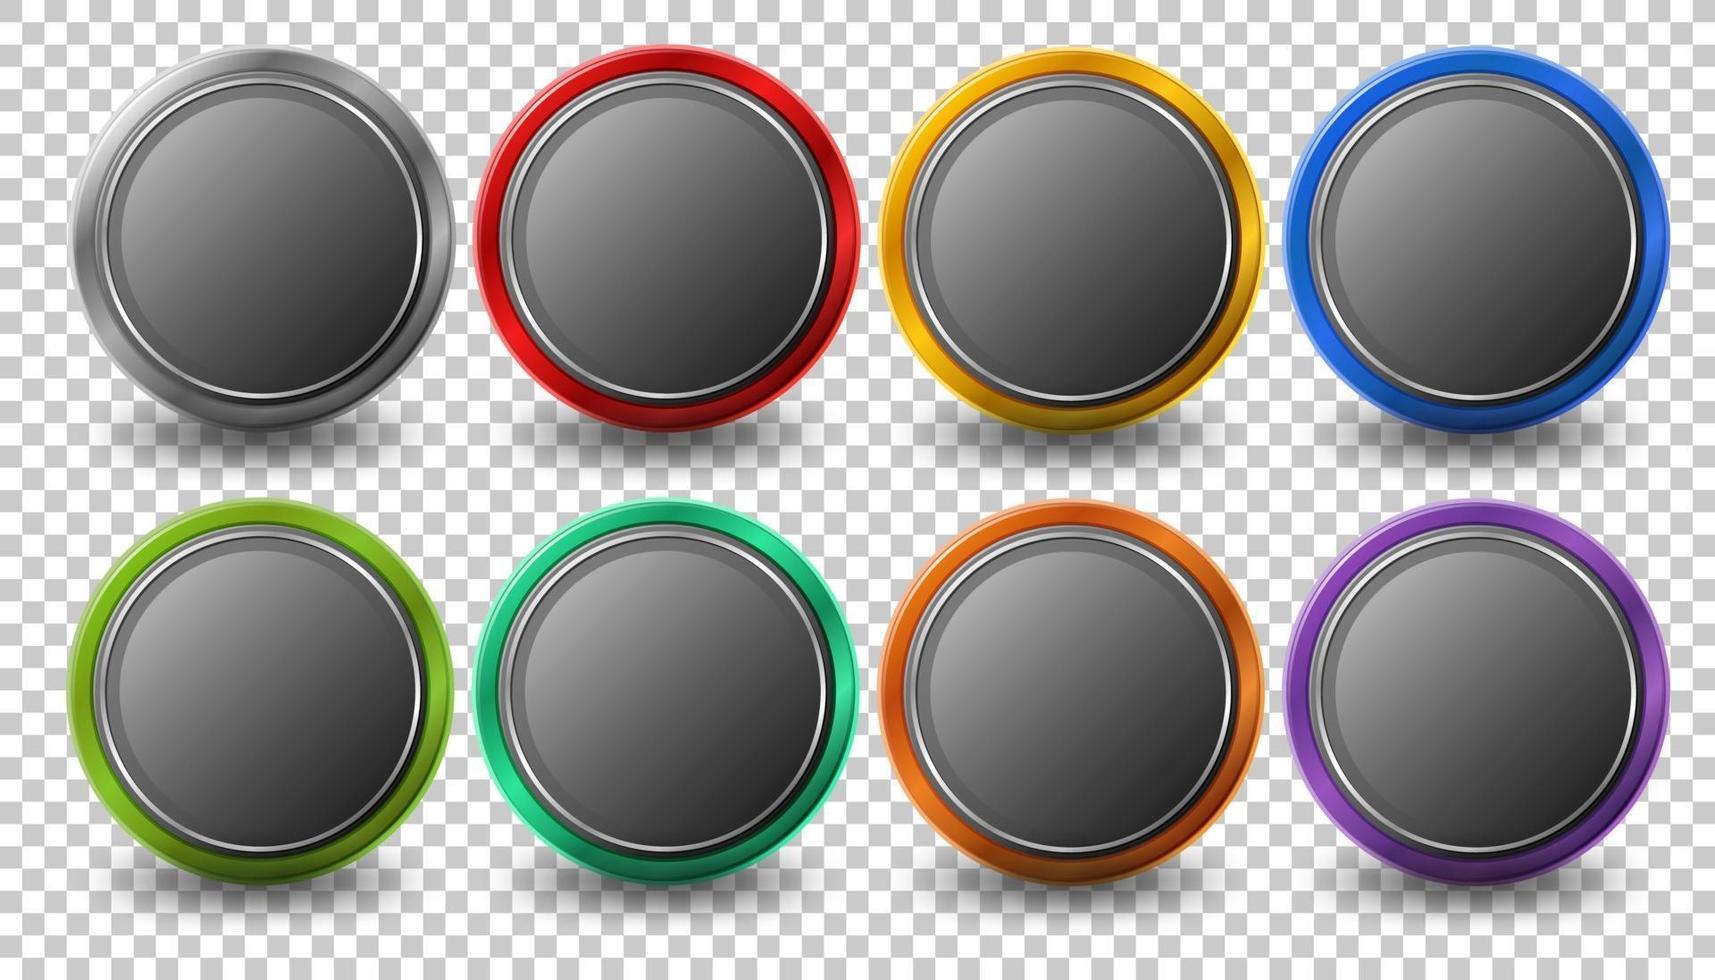 Set of rounded circle button with metal frame vector